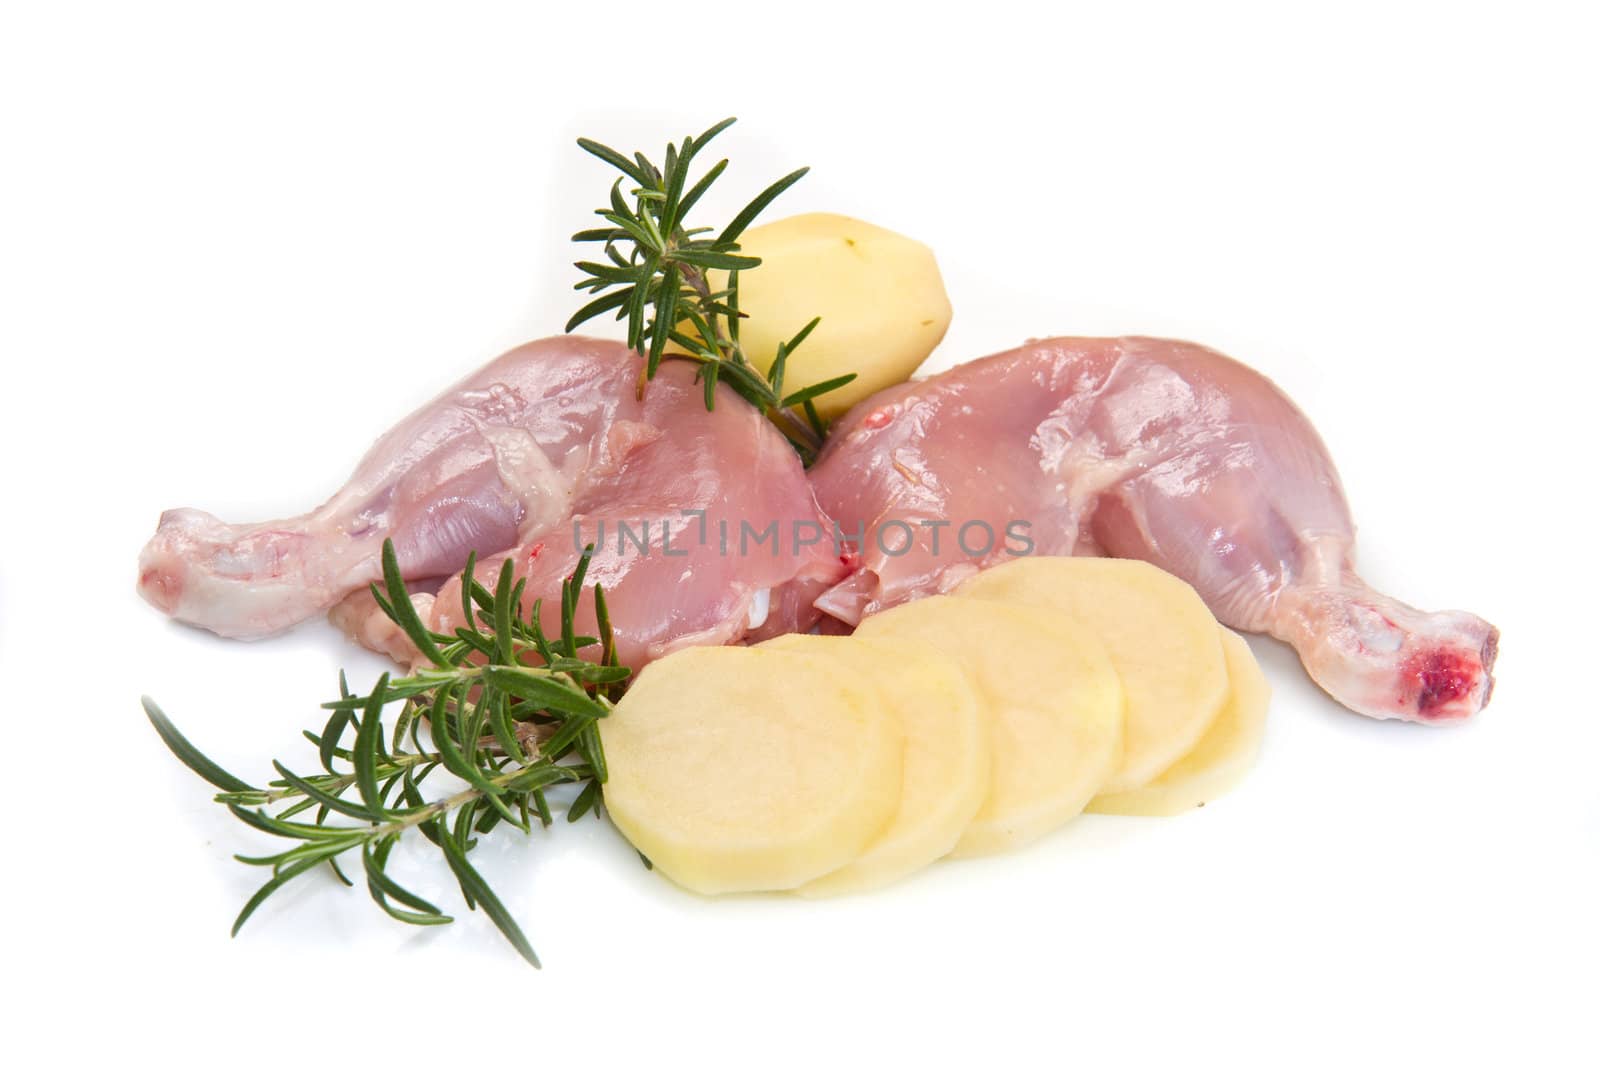 Raw chicken thighs with potatoes by lsantilli